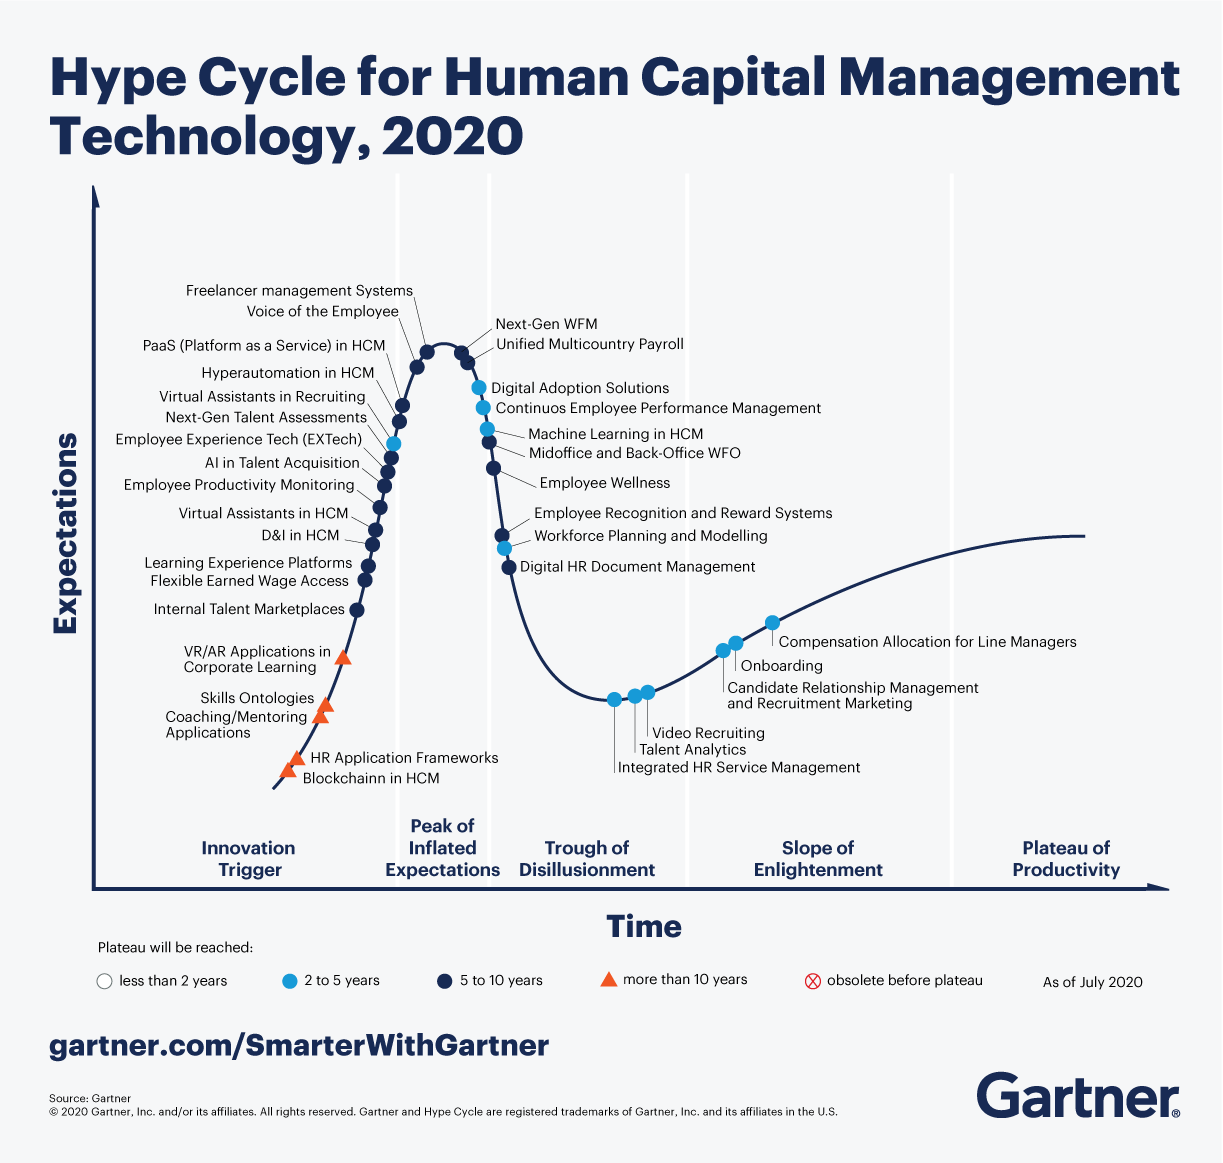 The Gartner Hype Cycle for Human Capital Management Technology, 2020